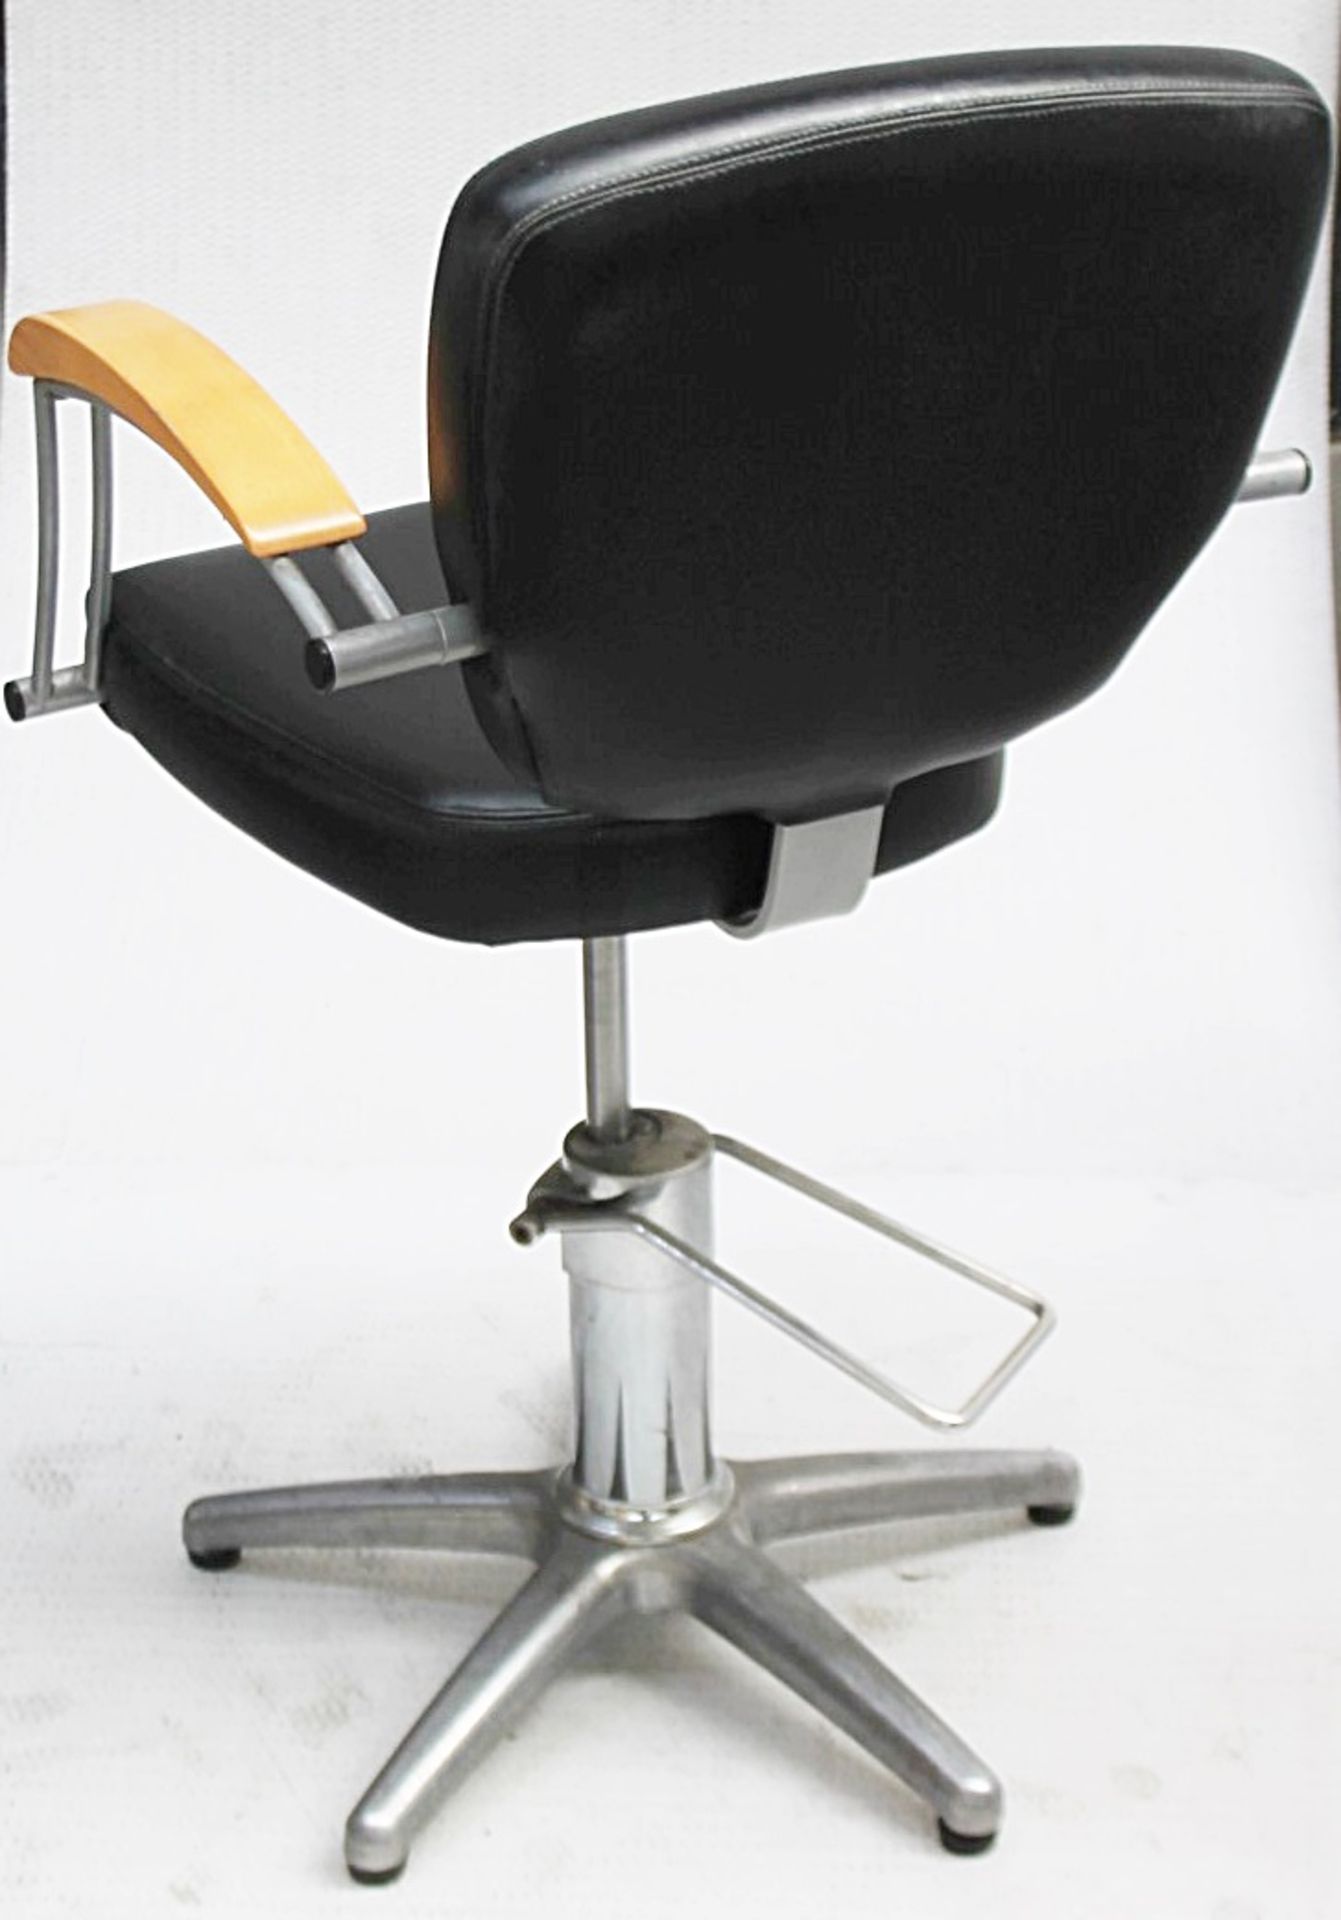 1 x Adjustable Black Hydraulic Barber Hairdressing Chair - Recently Removed From A Boutique Hair - Image 5 of 11